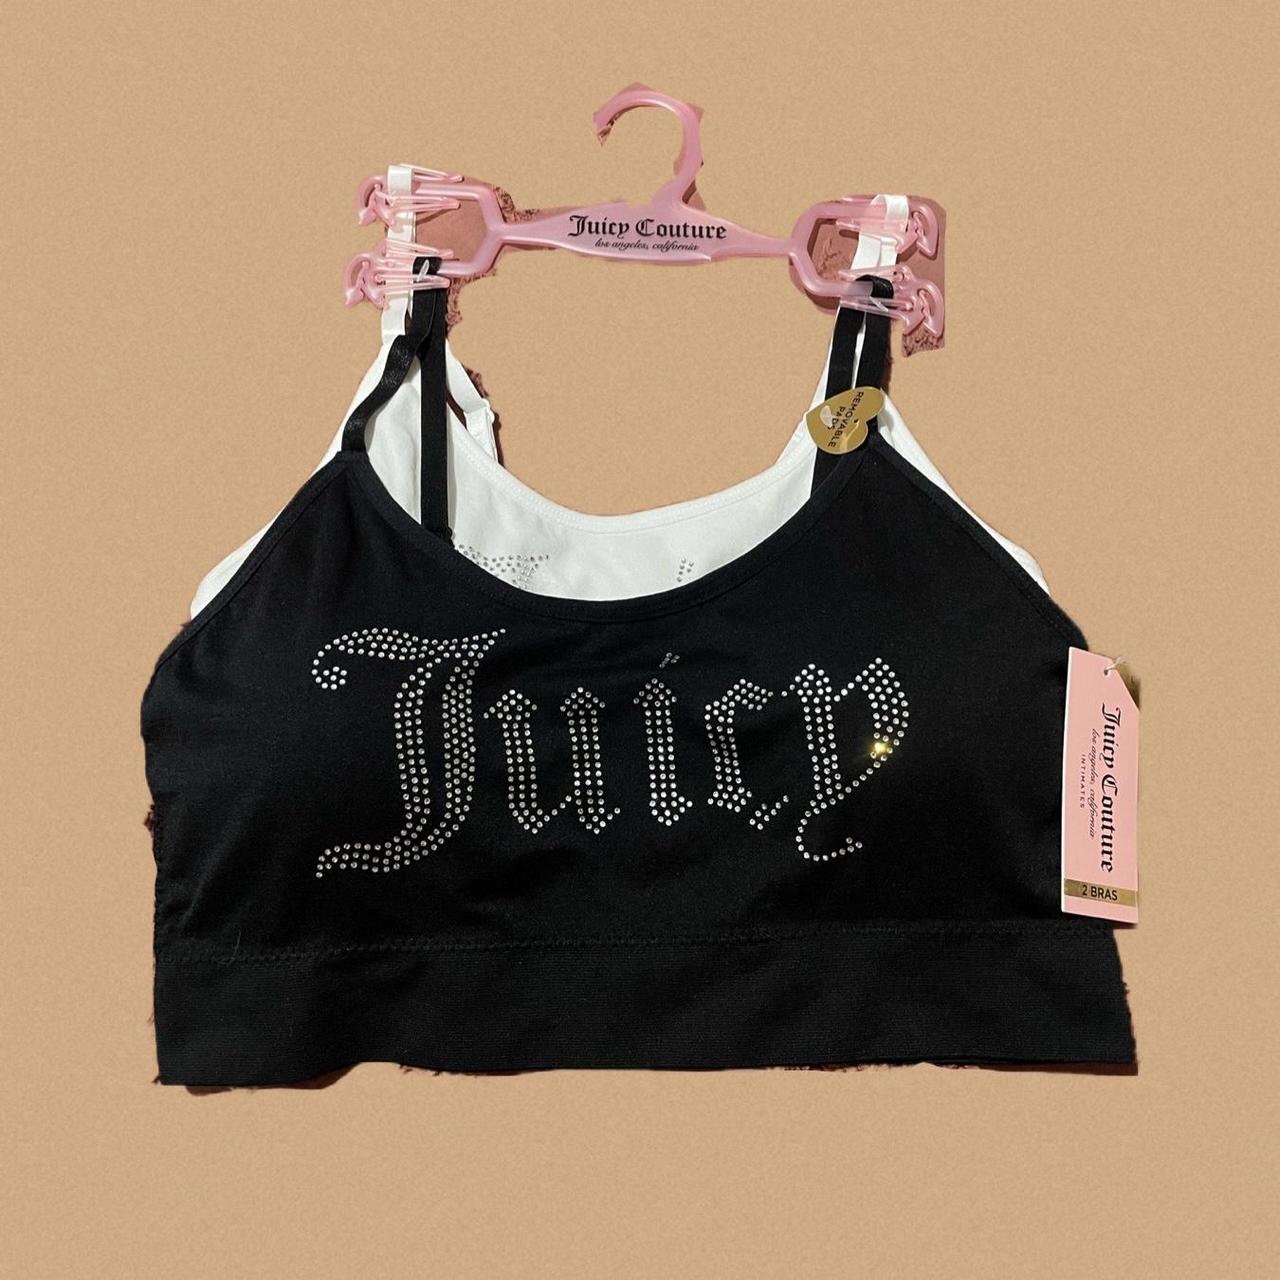 New 2 Large Juicy Couture Bras for Sale in Beverly Hills, TX - OfferUp